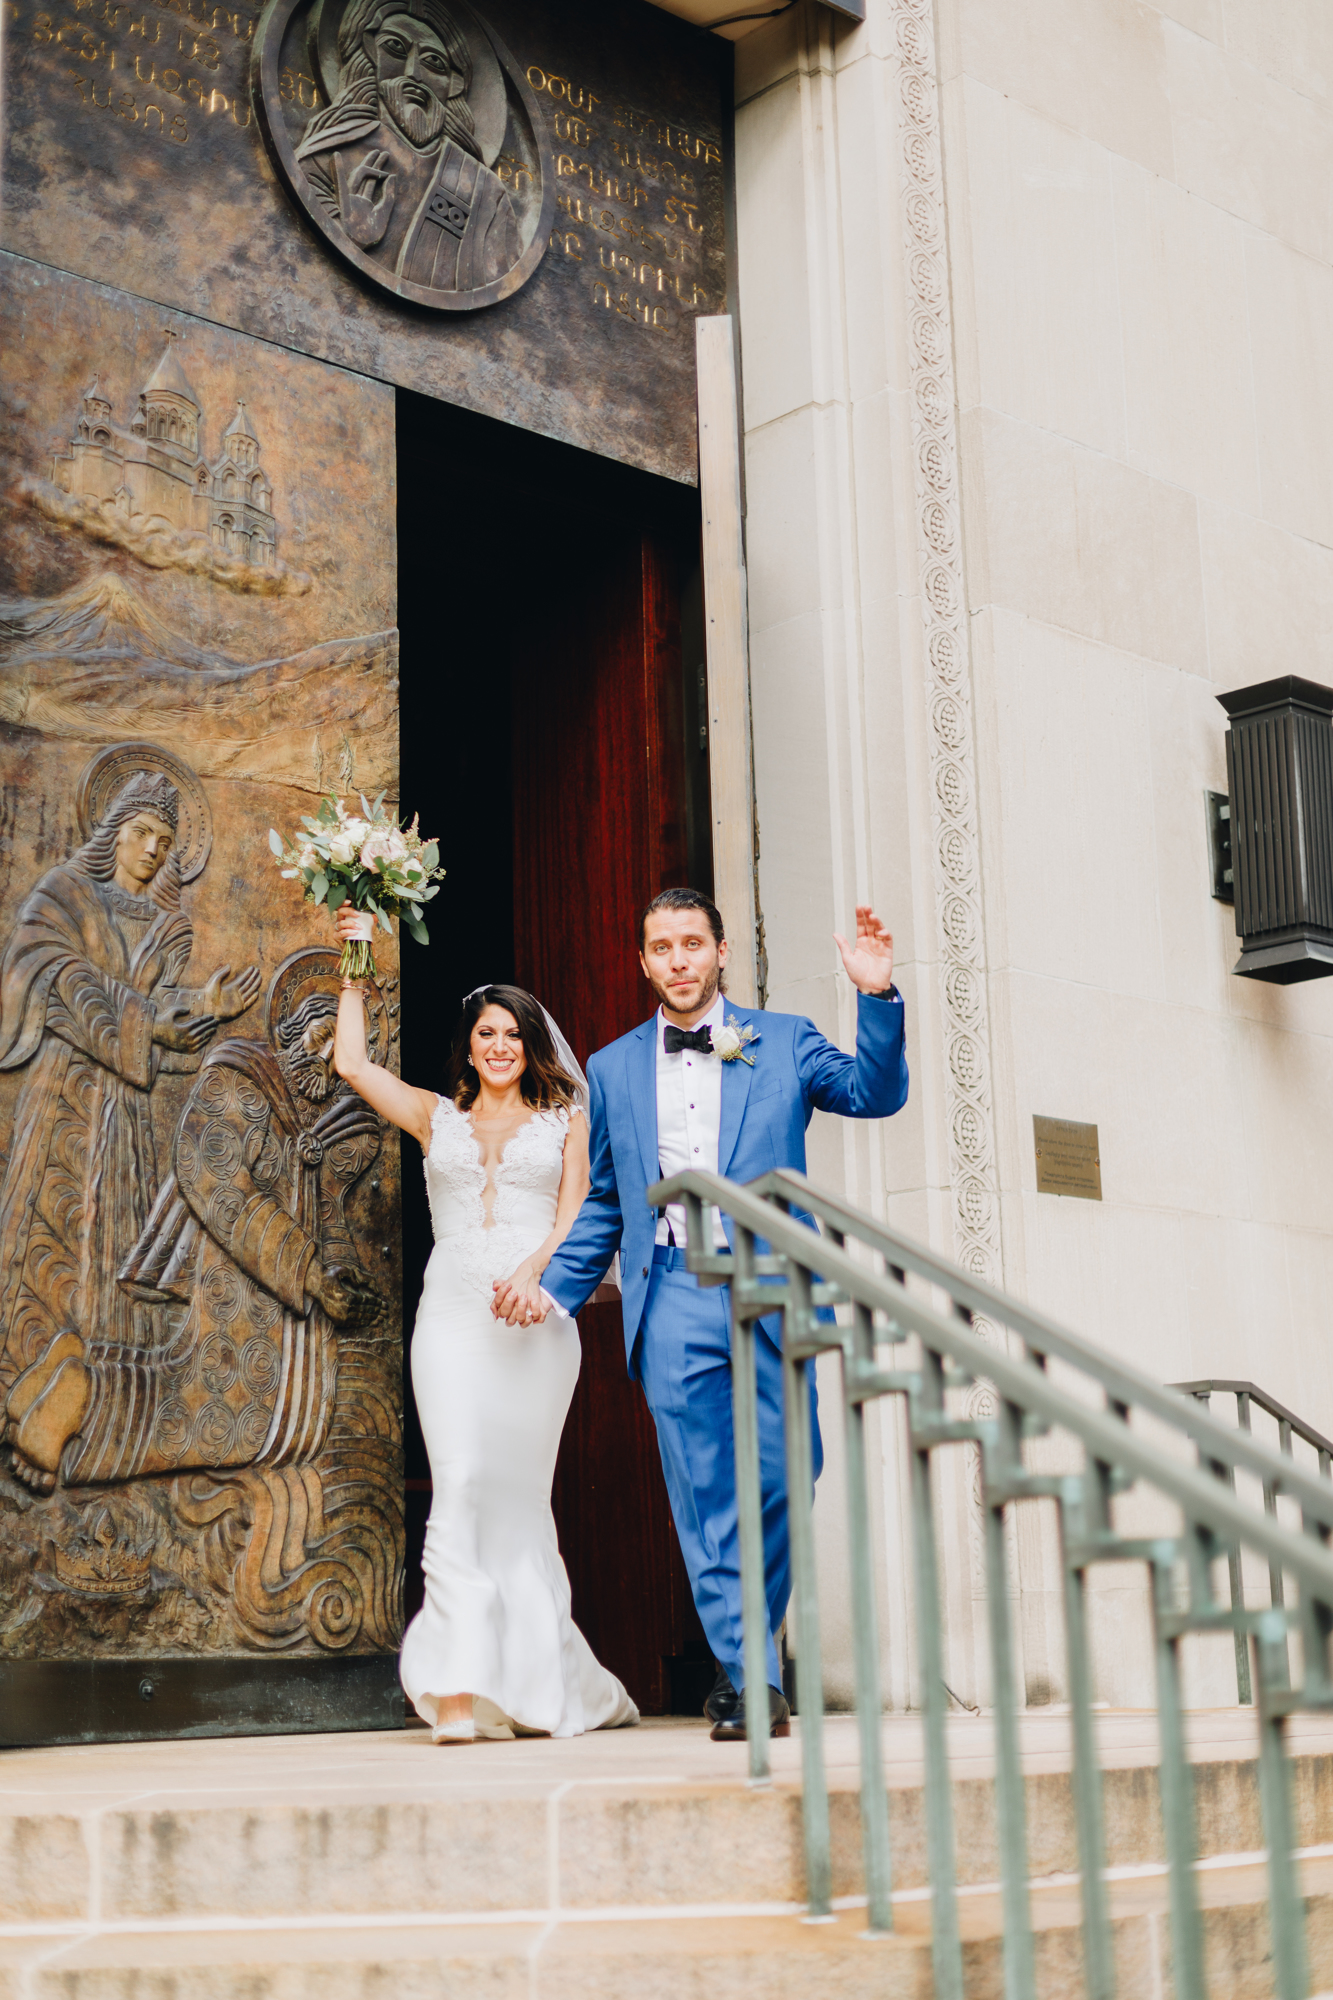 Bride and groom leaving the Armenian Church in New York